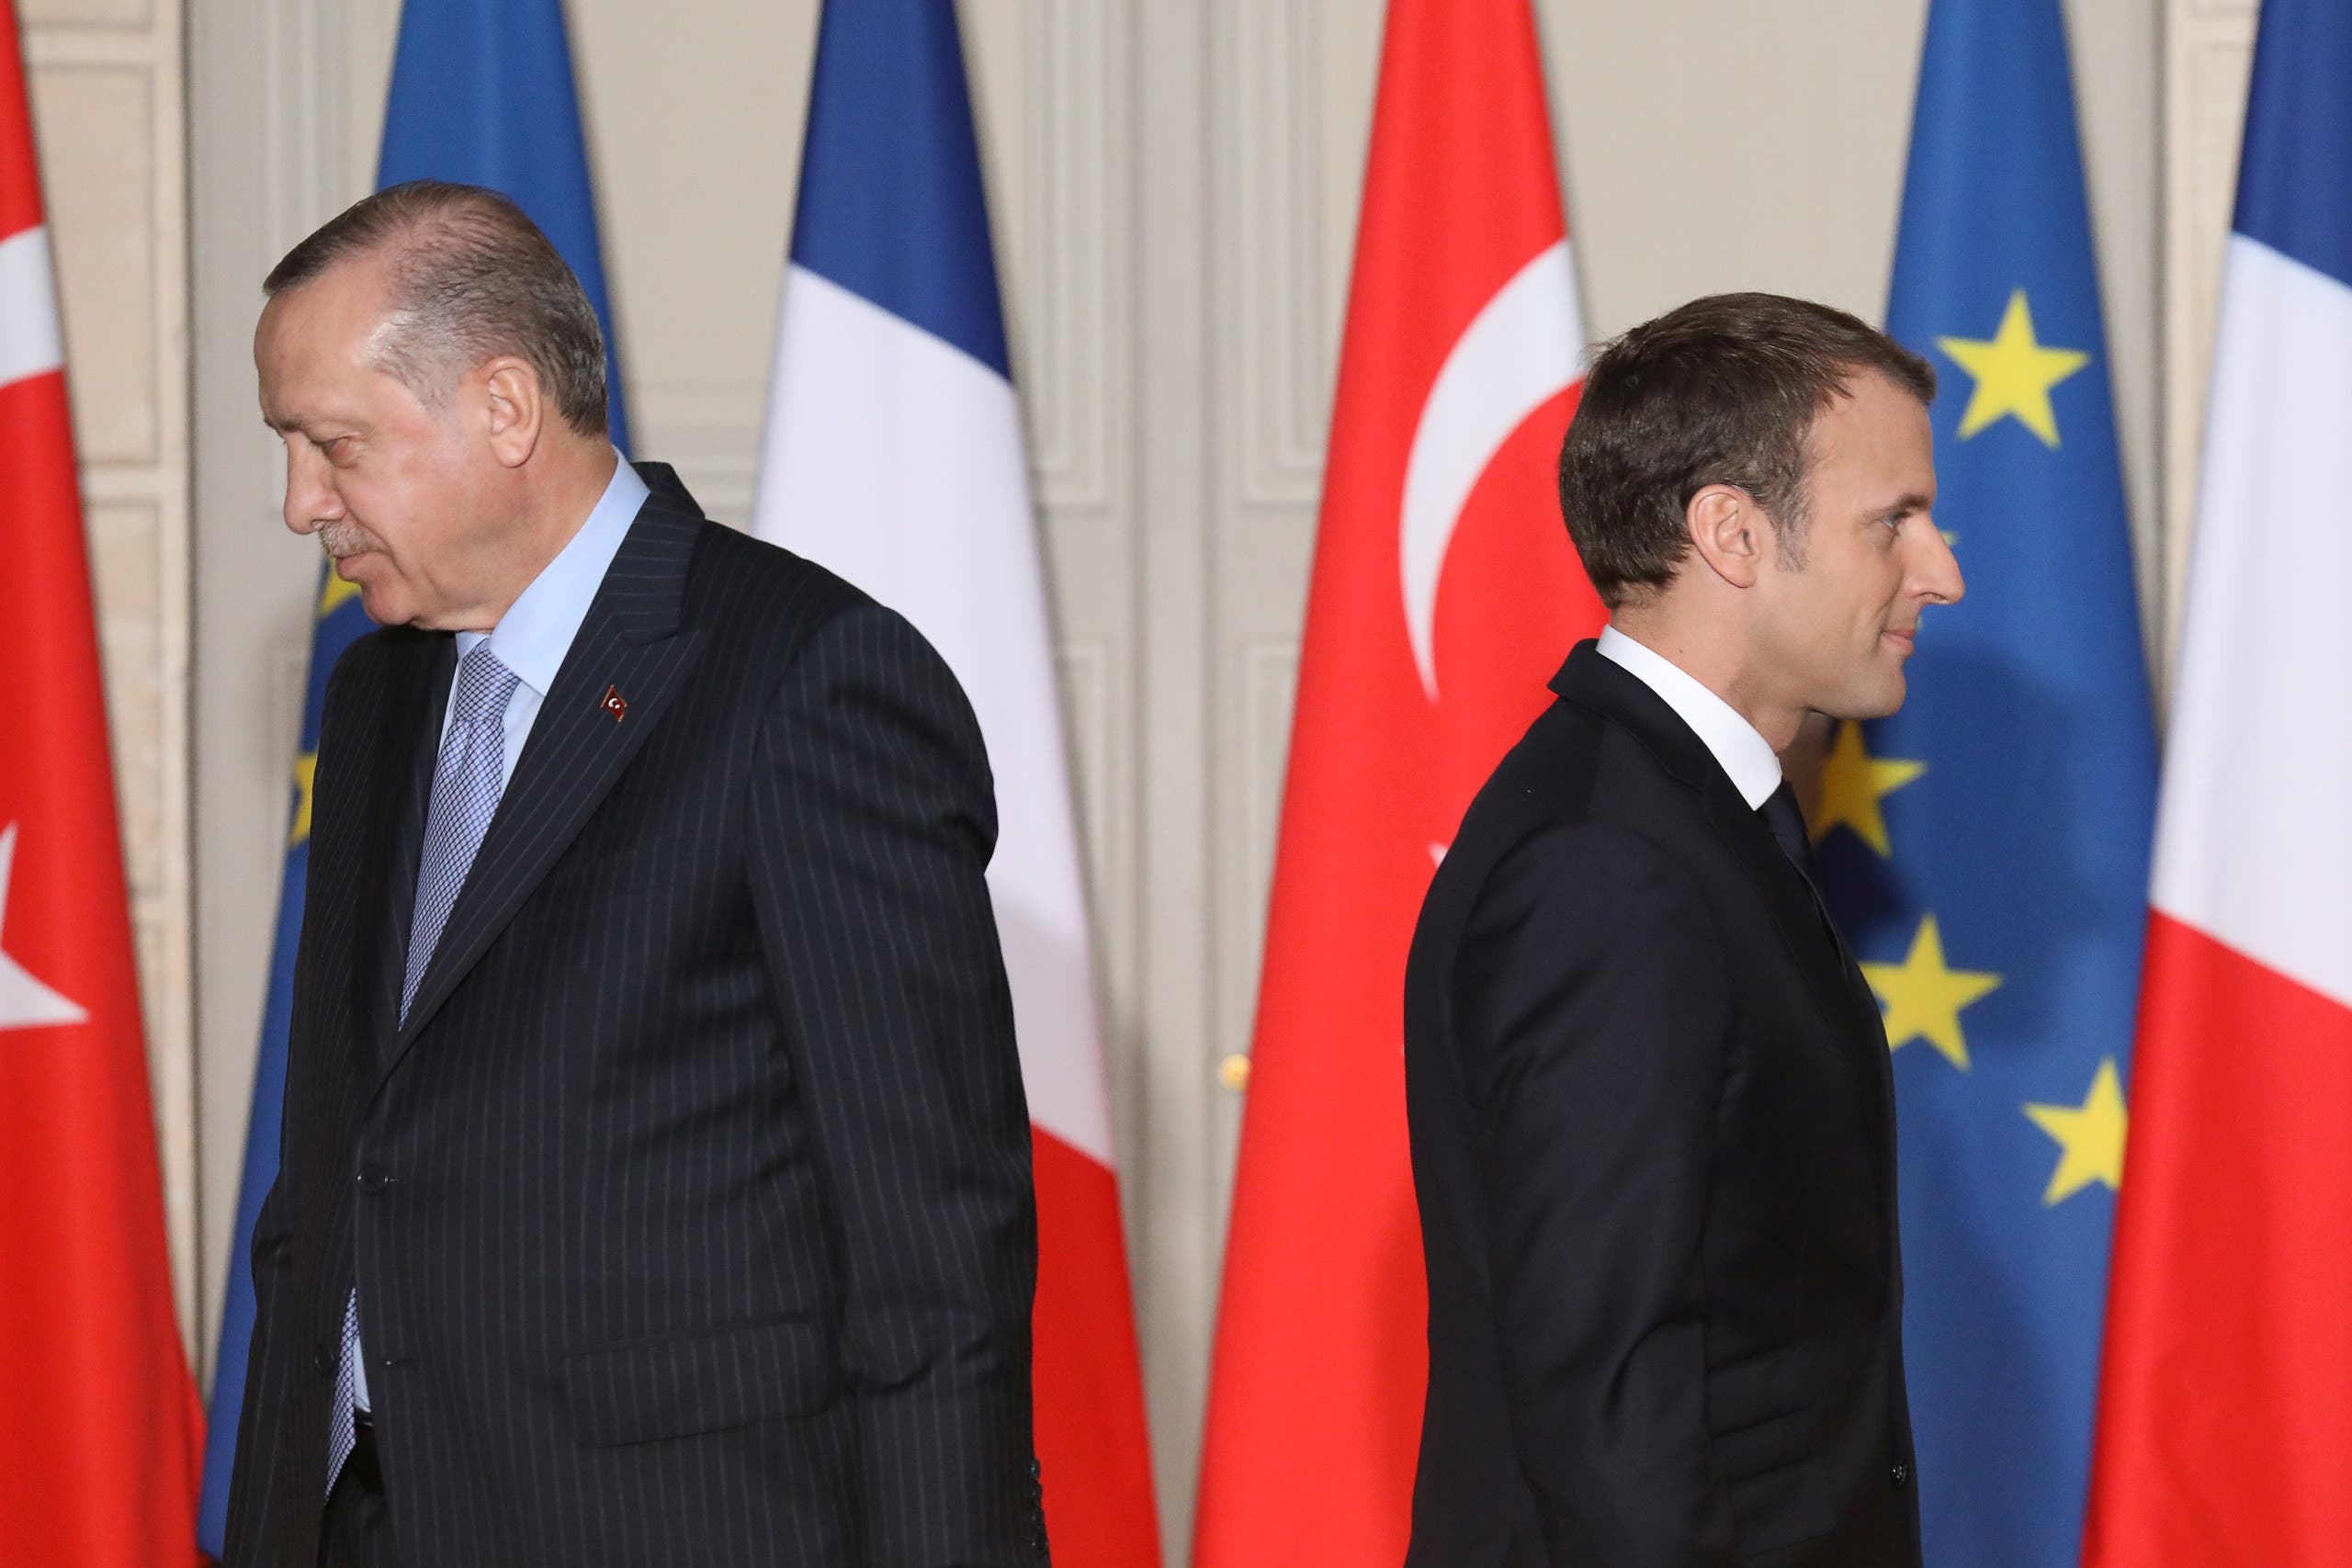 French President Emmanuel Macron (R) and Turkish President Recep Tayyip Erdogan walk during a joint press conference at the Elysee Palace in Paris, France, January 5, 2018. (Reuters)